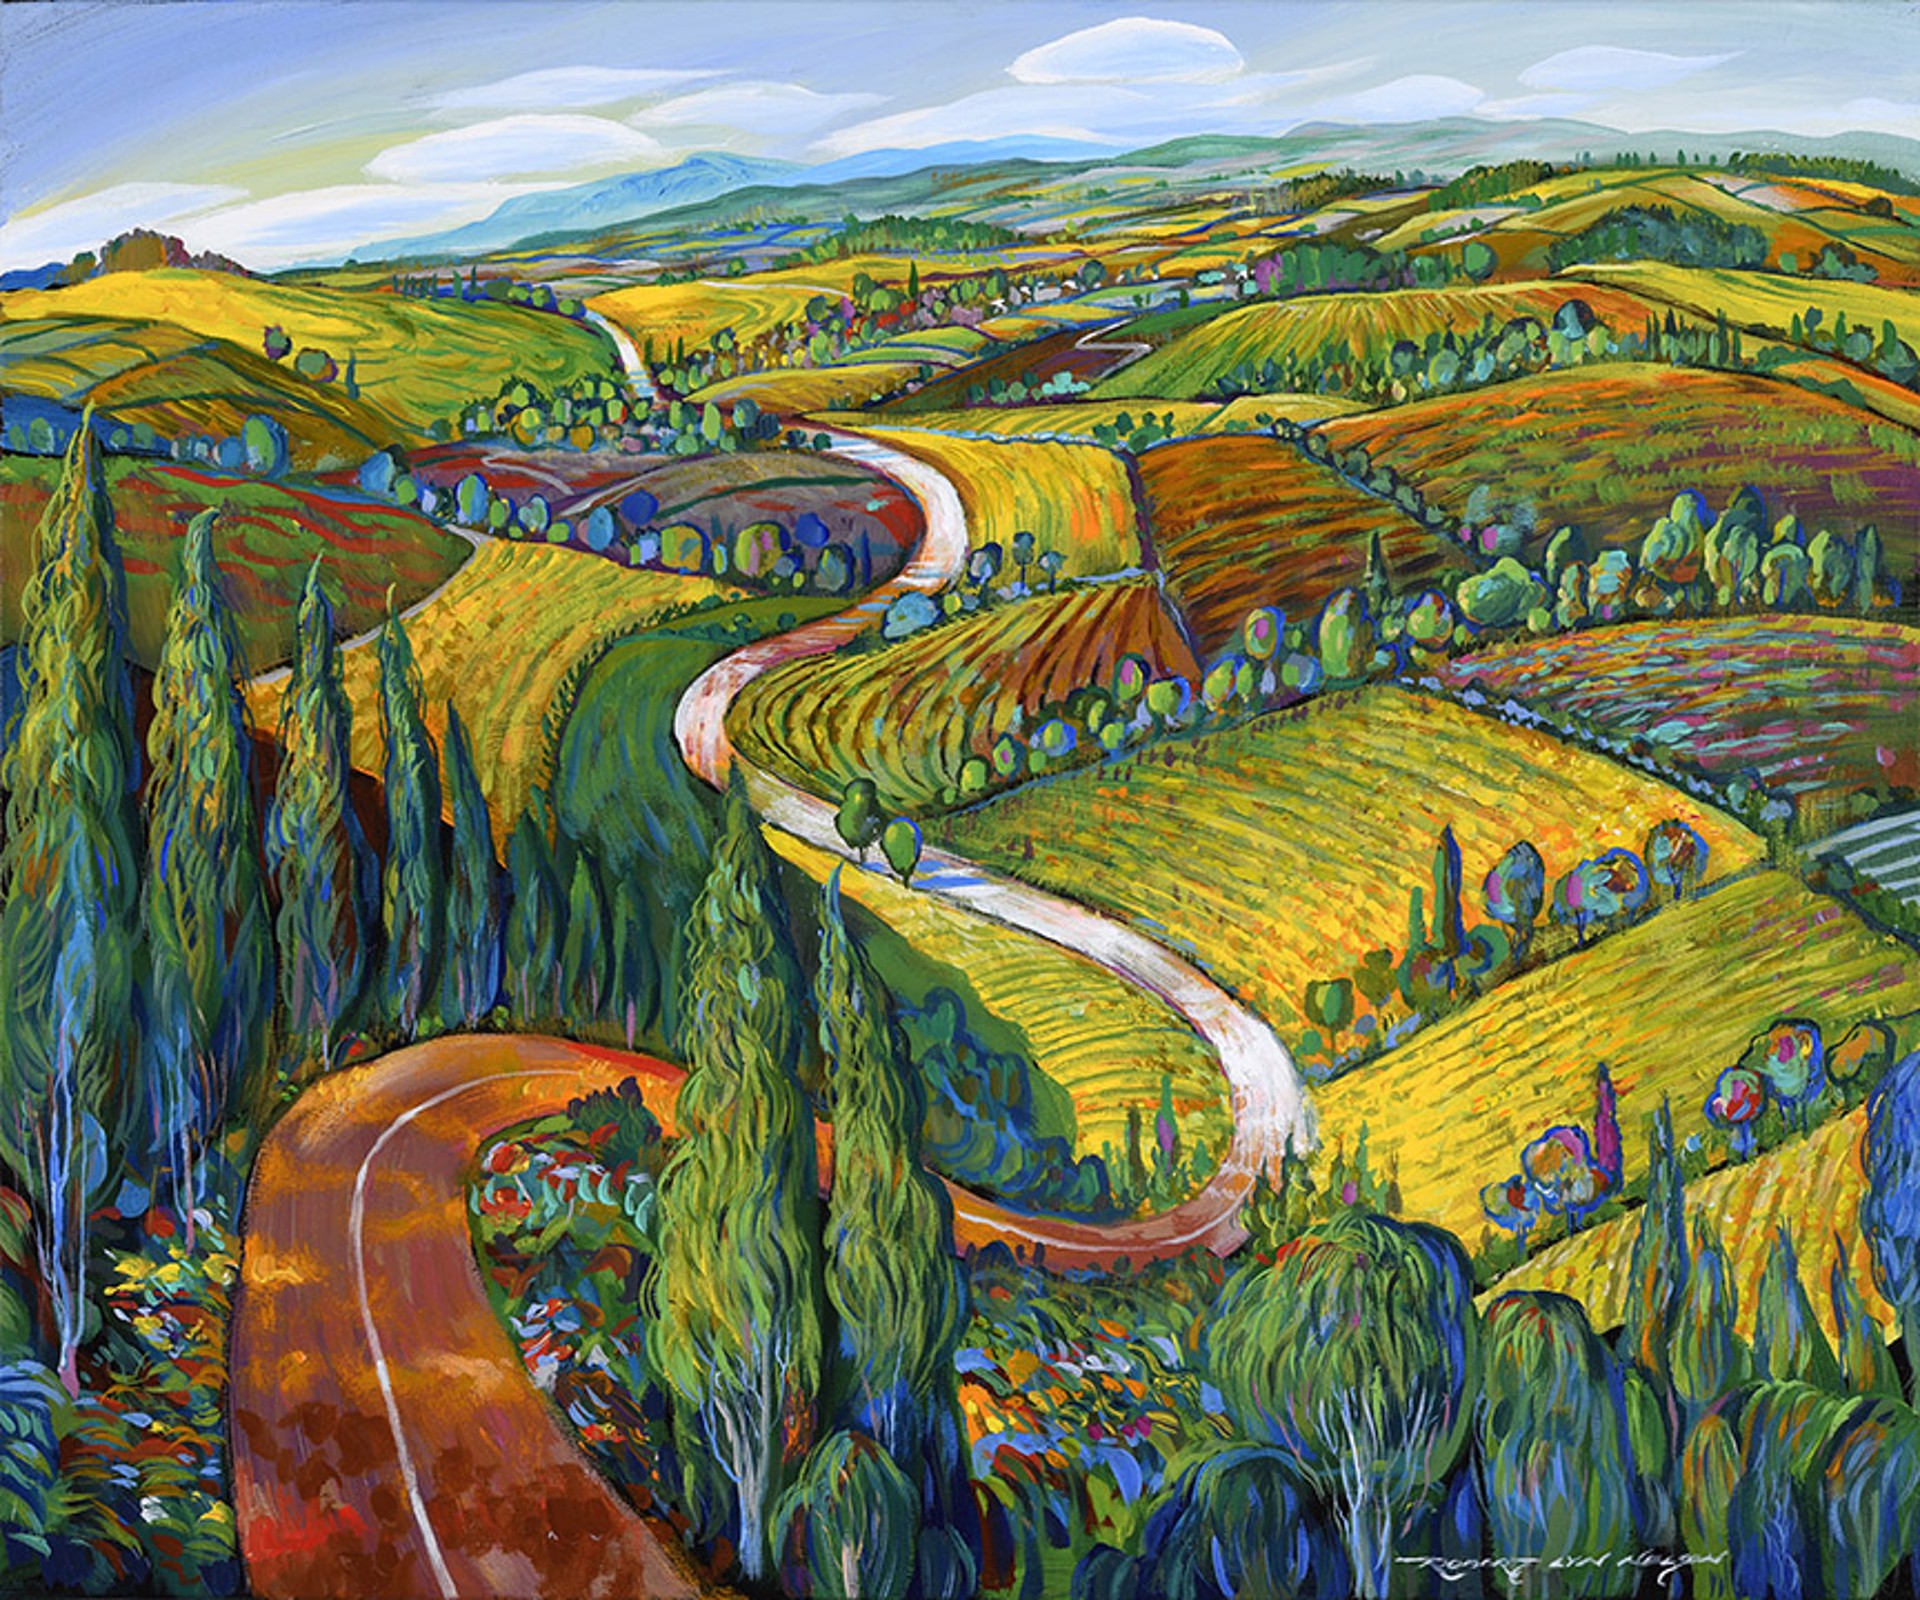 Patterns - Wine Country Series by Robert Lyn Nelson